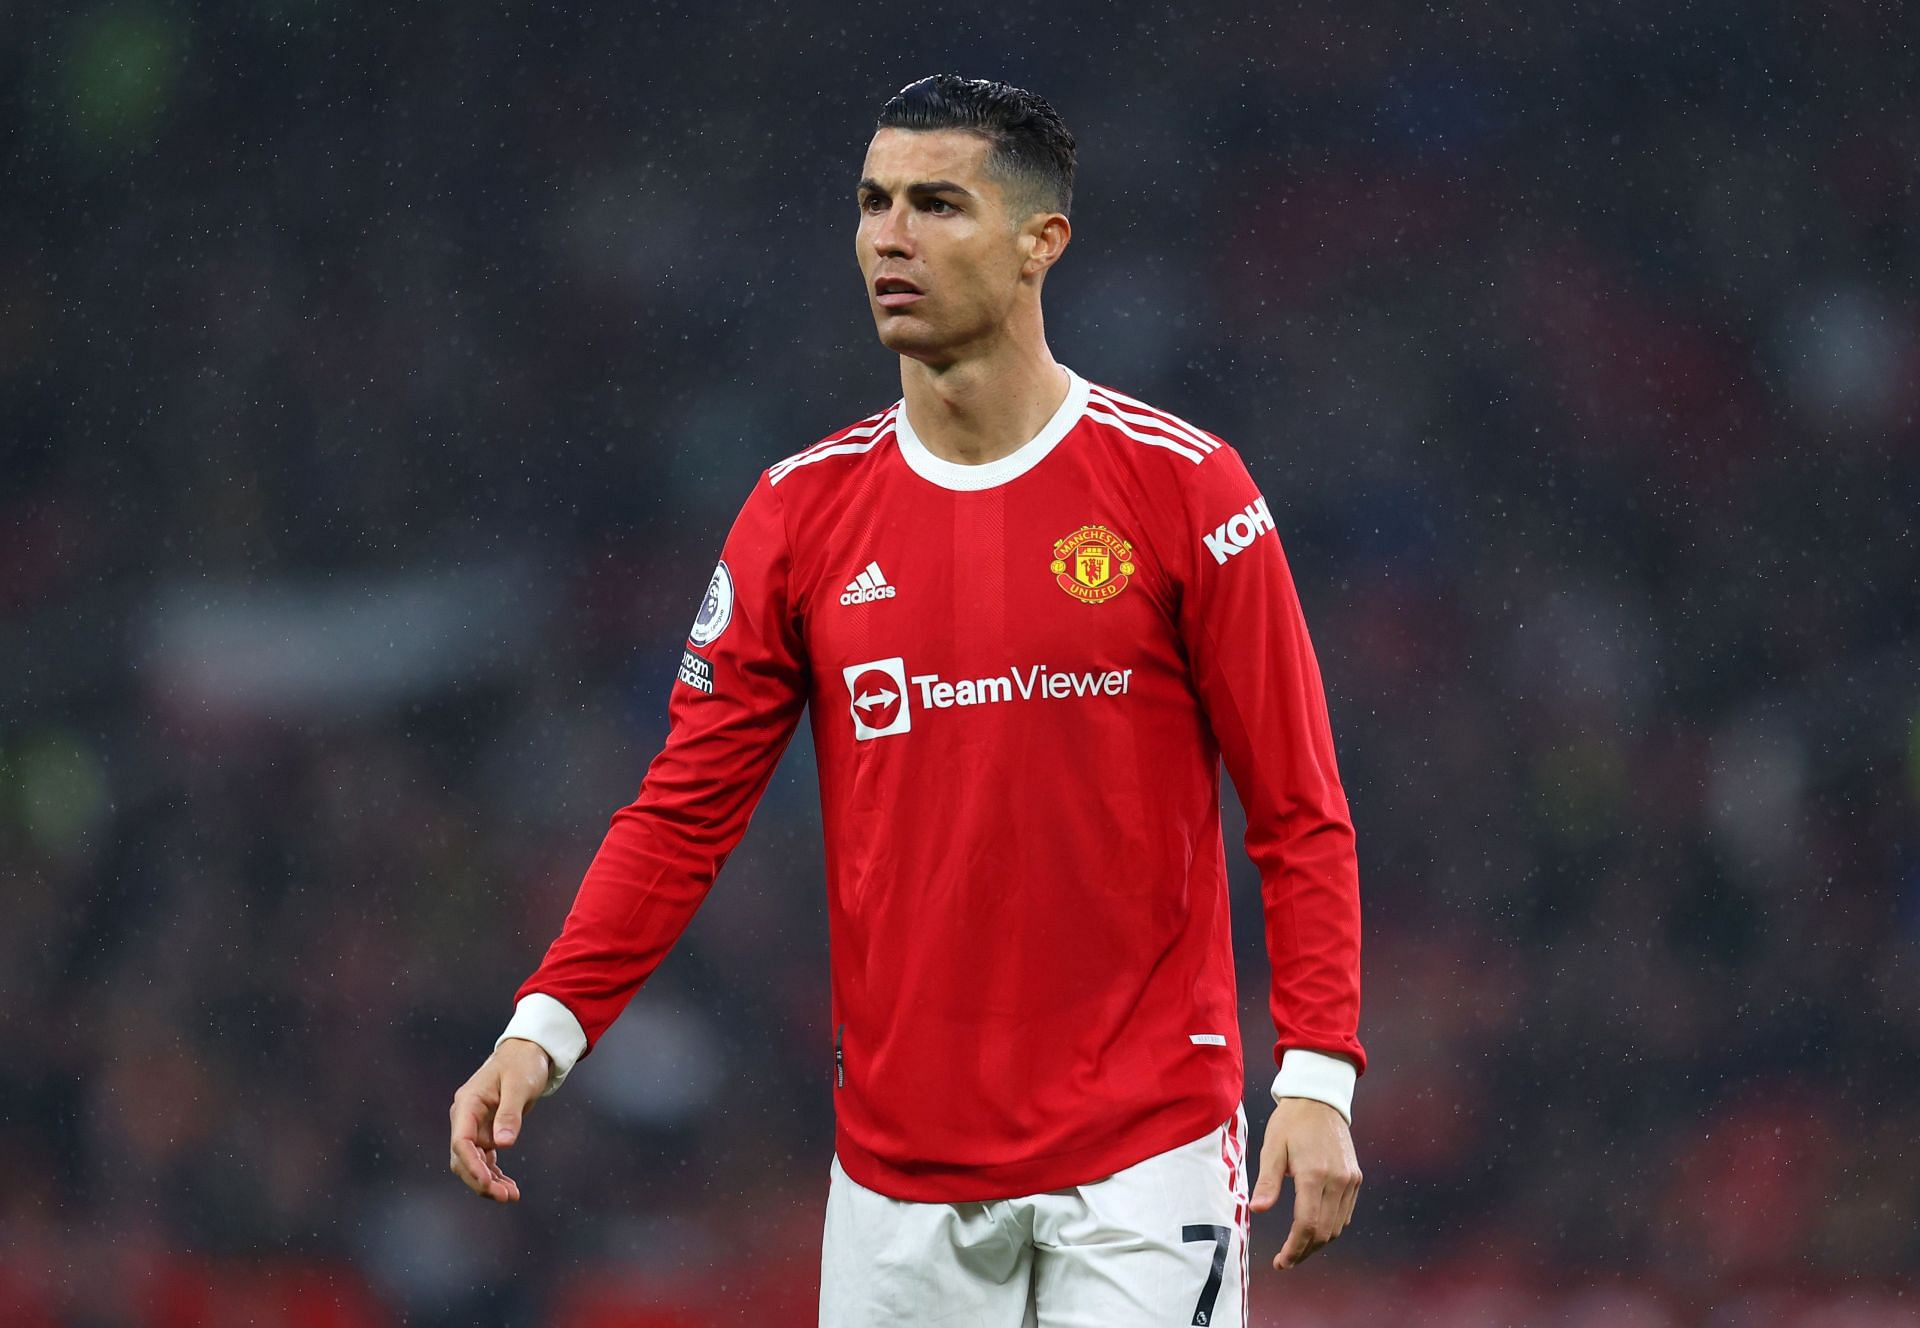 Cristiano Ronaldo and Manchester United face Brentford in the EPL.